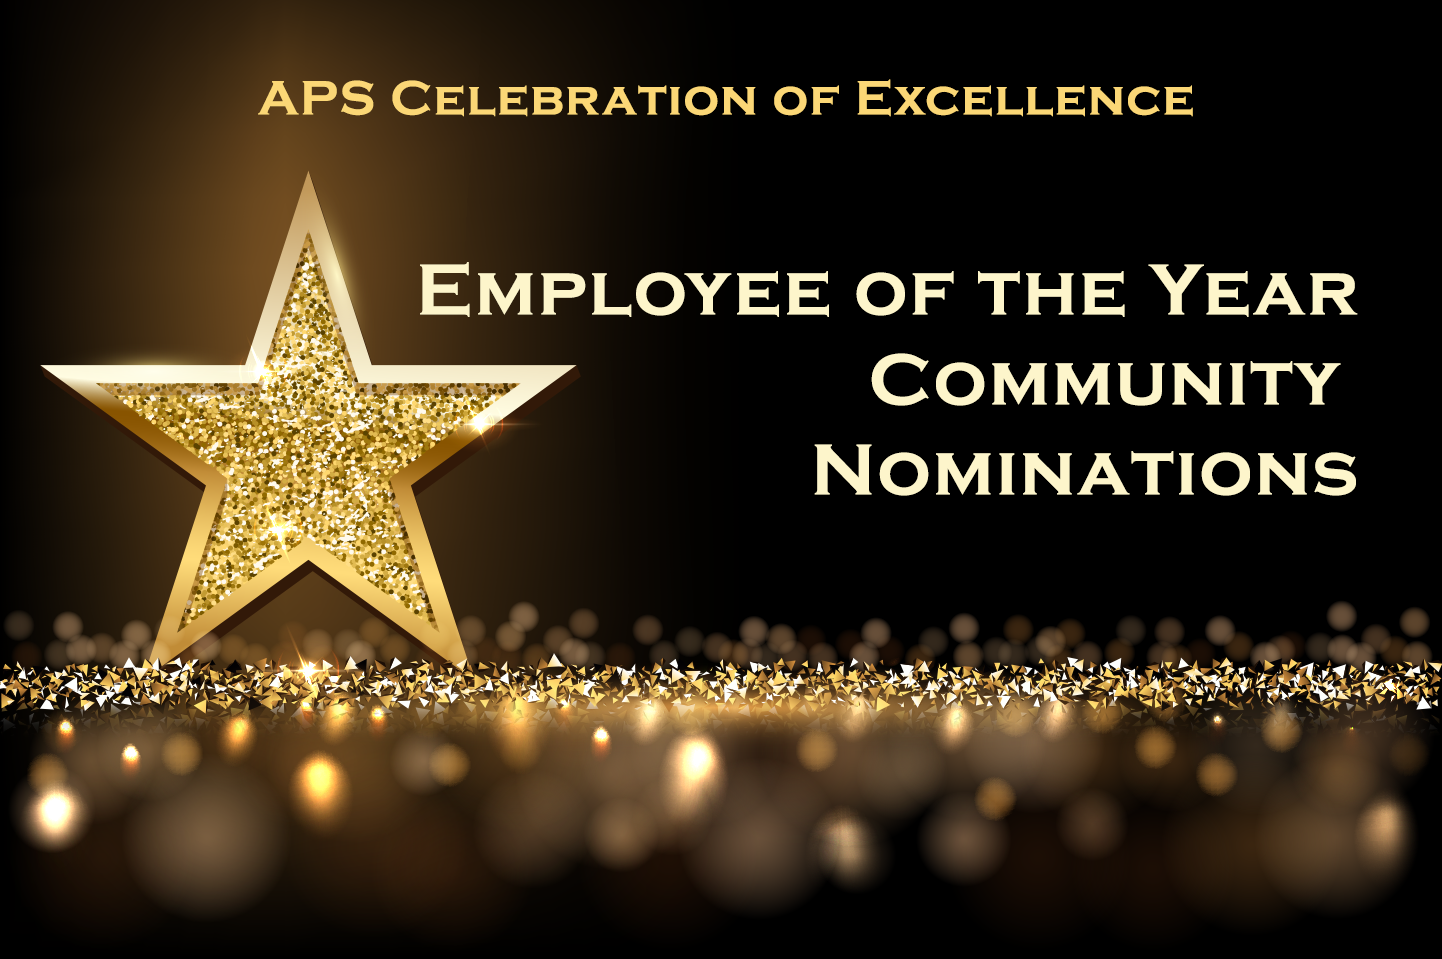 Employee of the Year community nominations banner